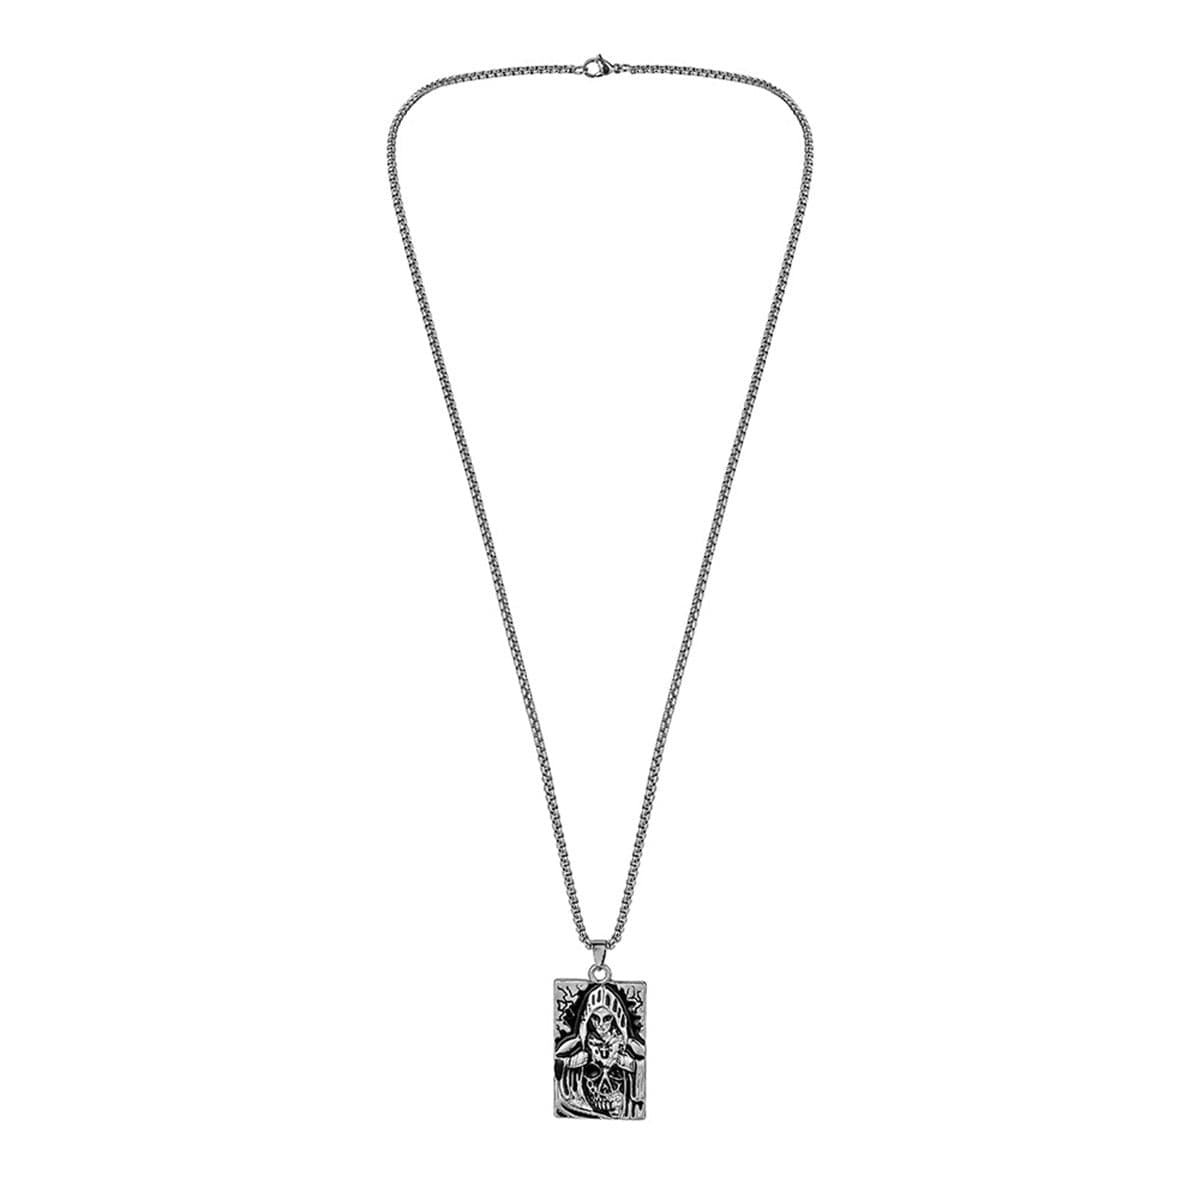 Silver-Plated Skull Card Pendant Necklace